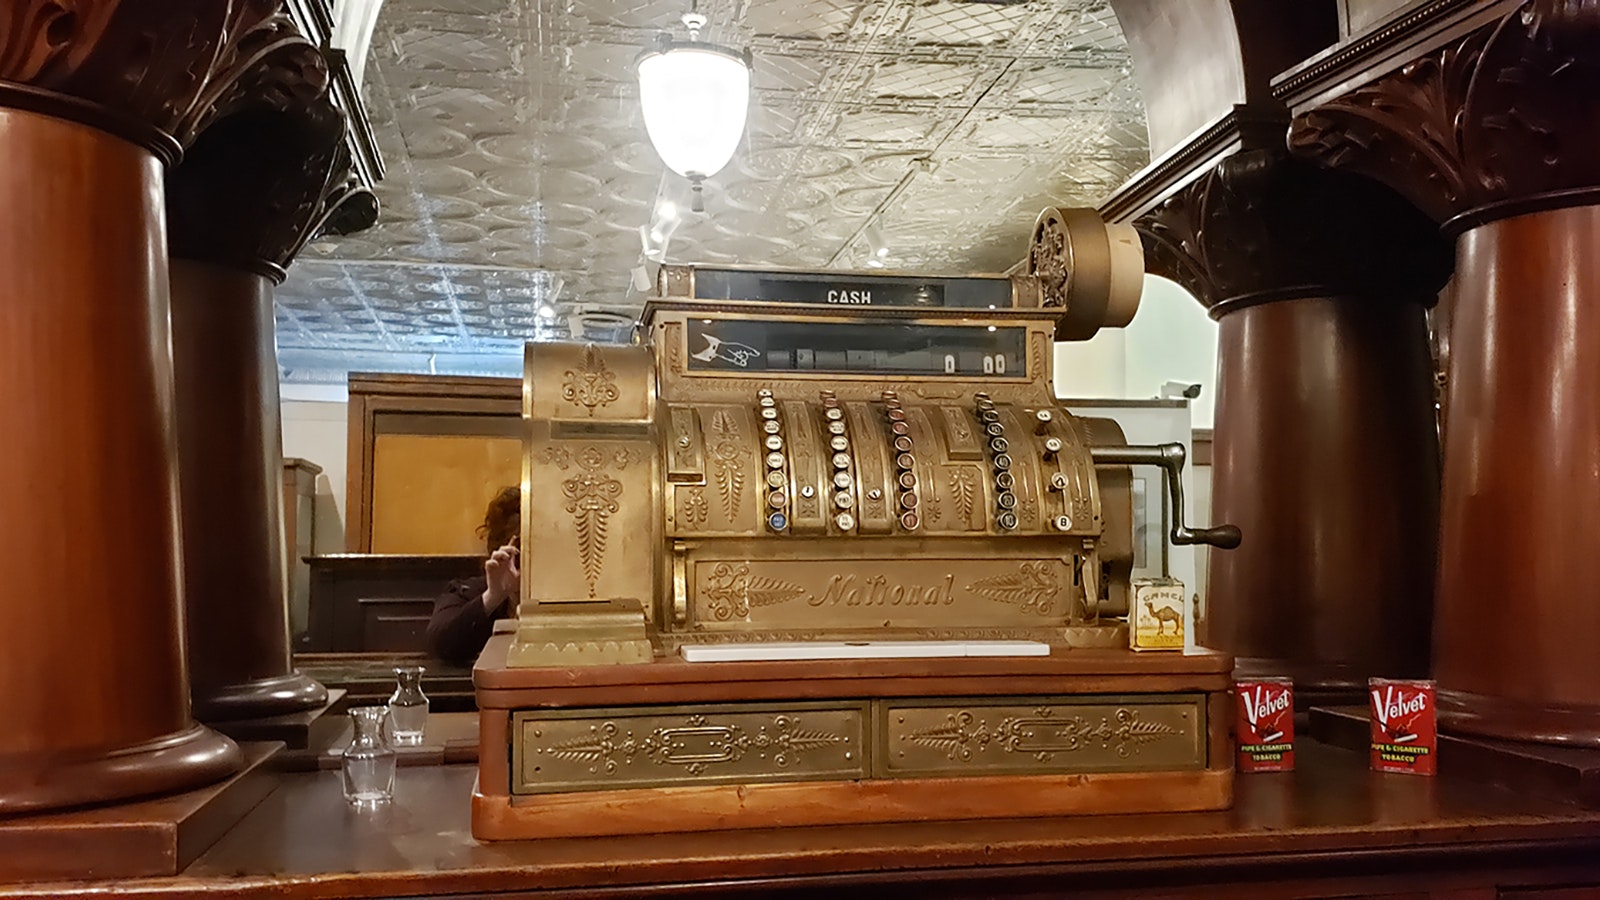 A cash register like one that would have been in the Hole in the Wall Bar.